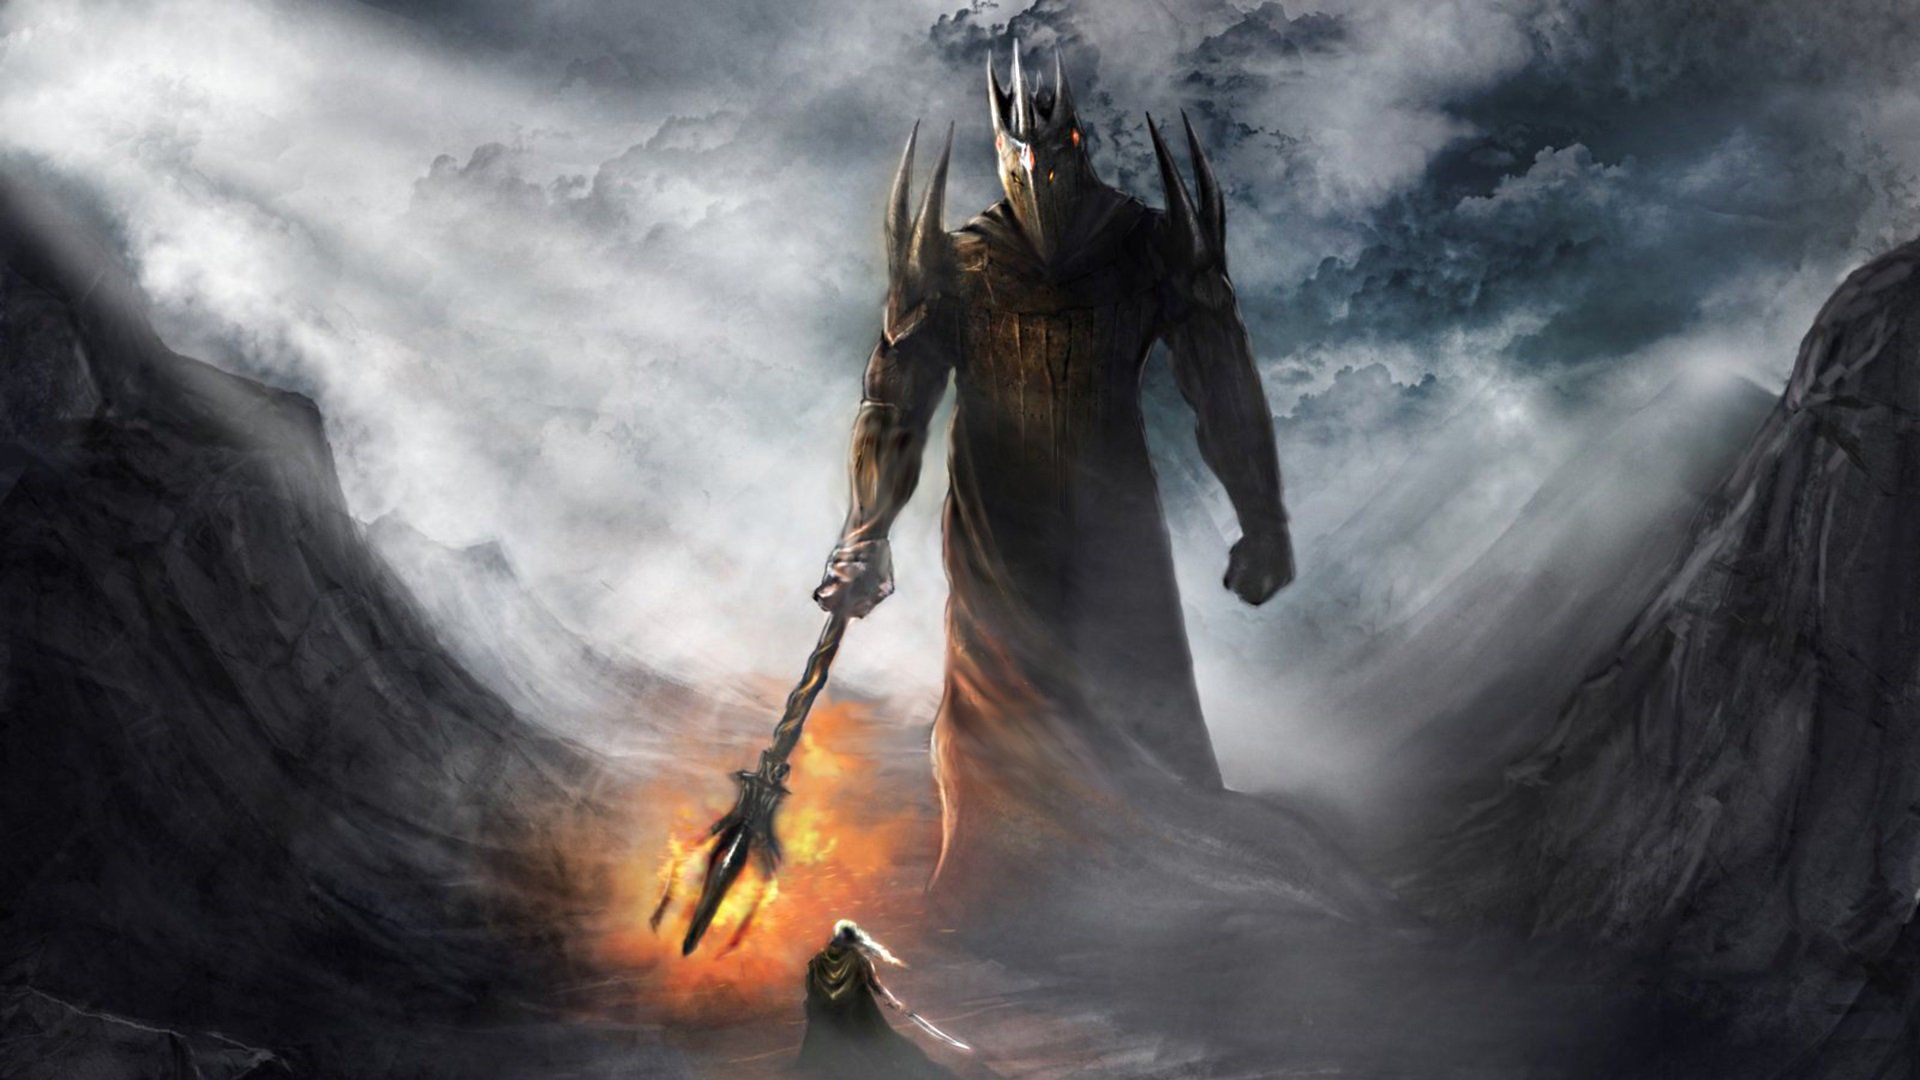 Download Sauron wallpapers for mobile phone free Sauron HD pictures